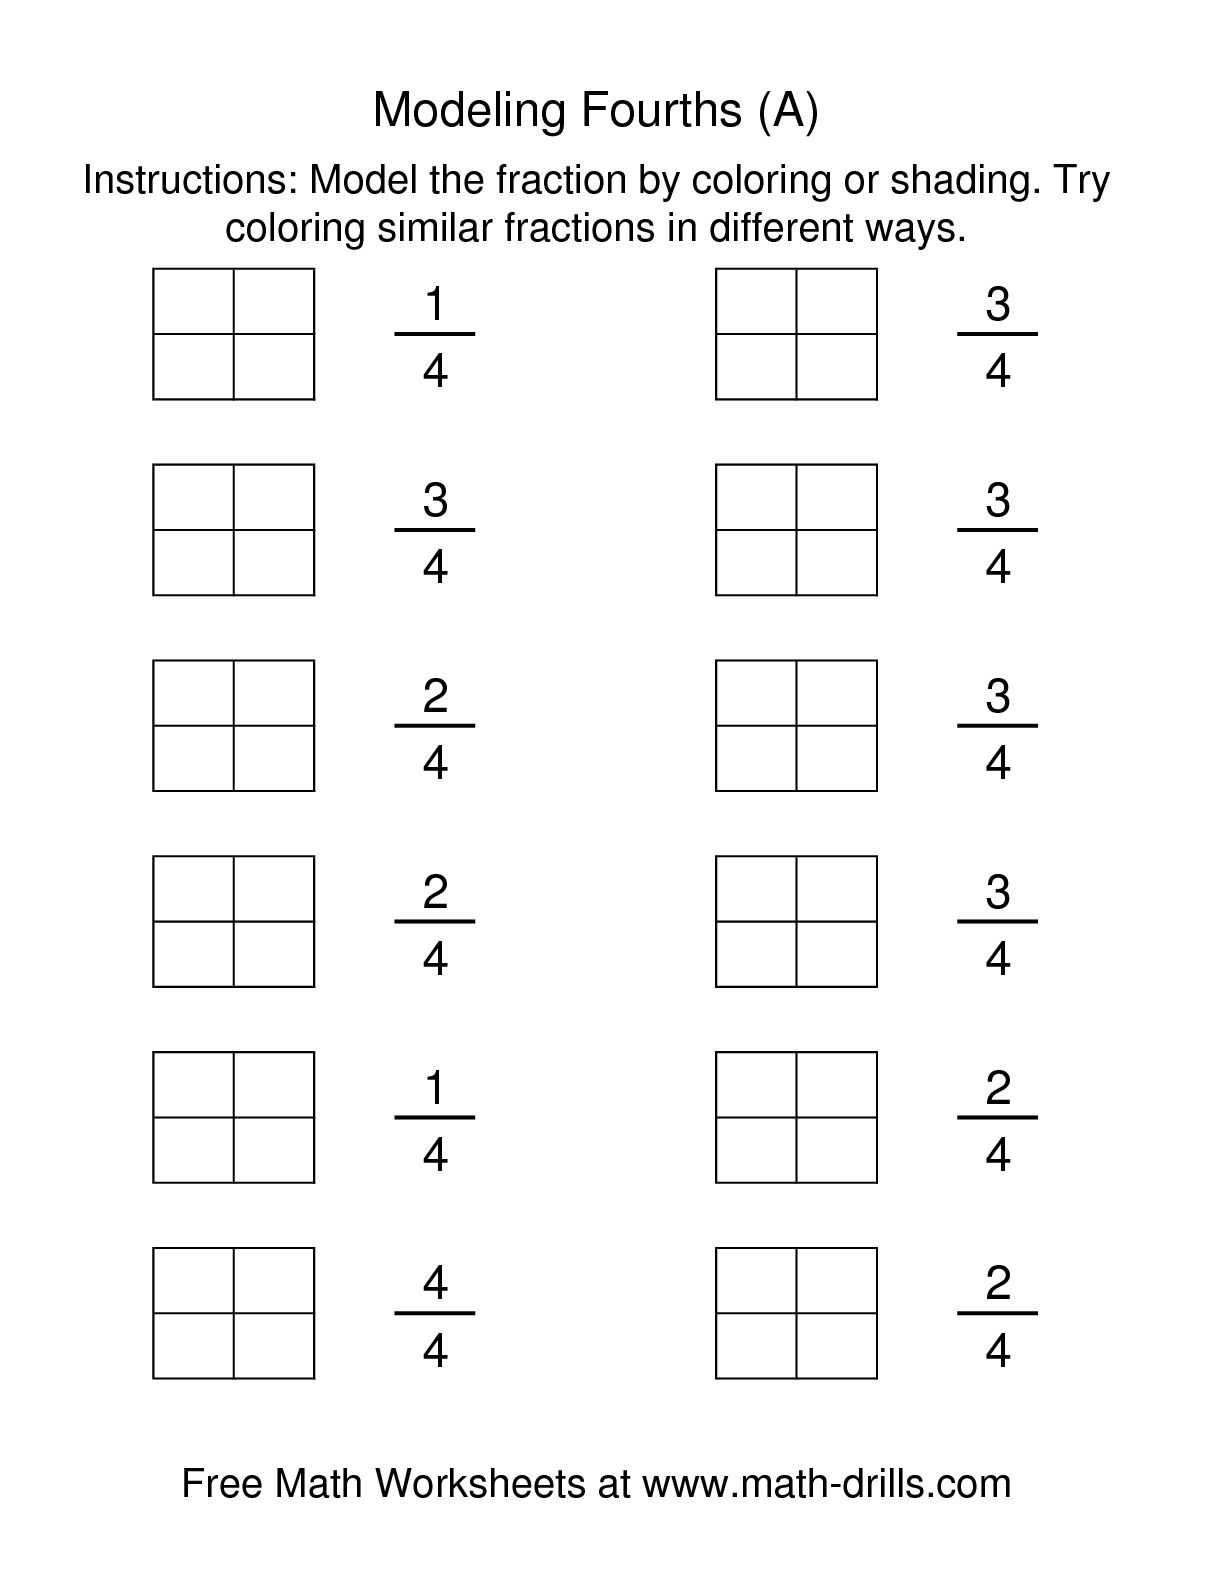 Reducing Fractions to Lowest Terms Worksheets as Well as Fraction Worksheets Ks1 Fractions Lesson Plan Primary Resources Pdf